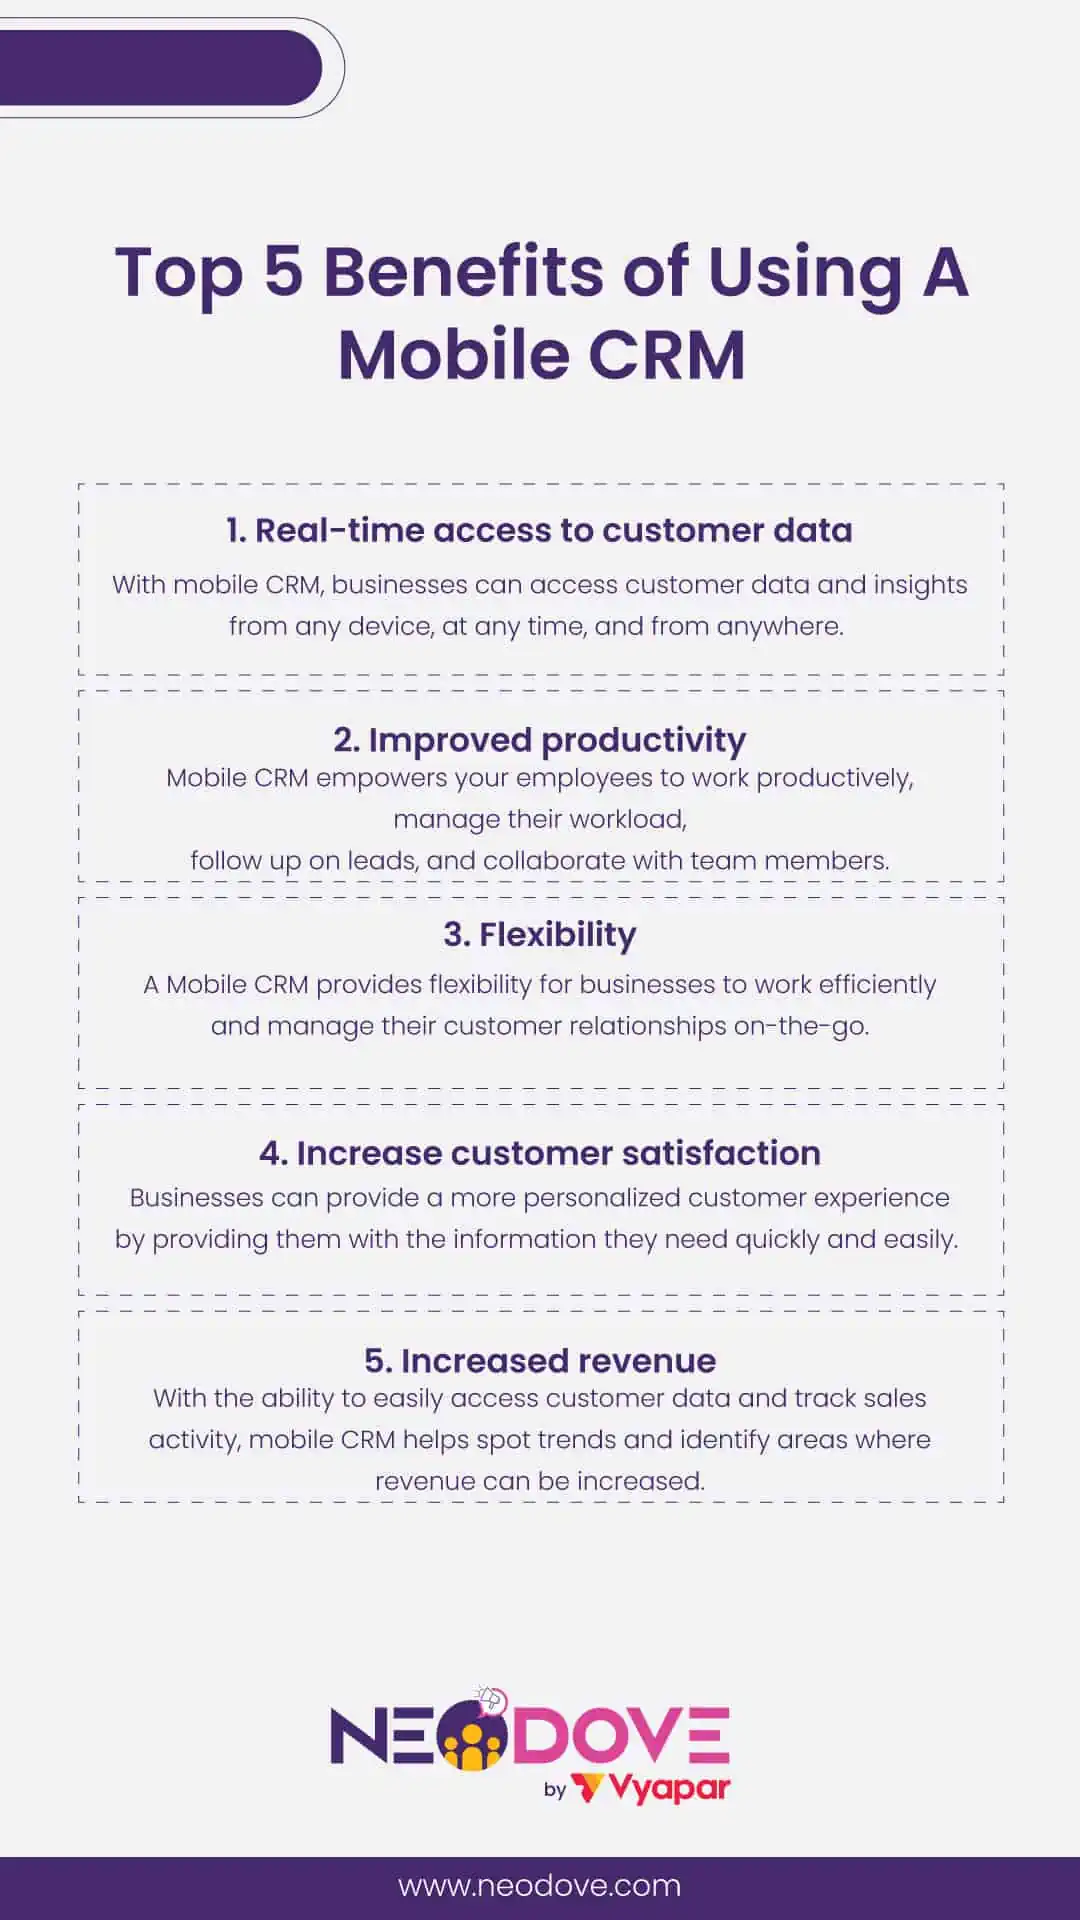 Top 5 Benefits of Using A Mobile CRM - NeoDove